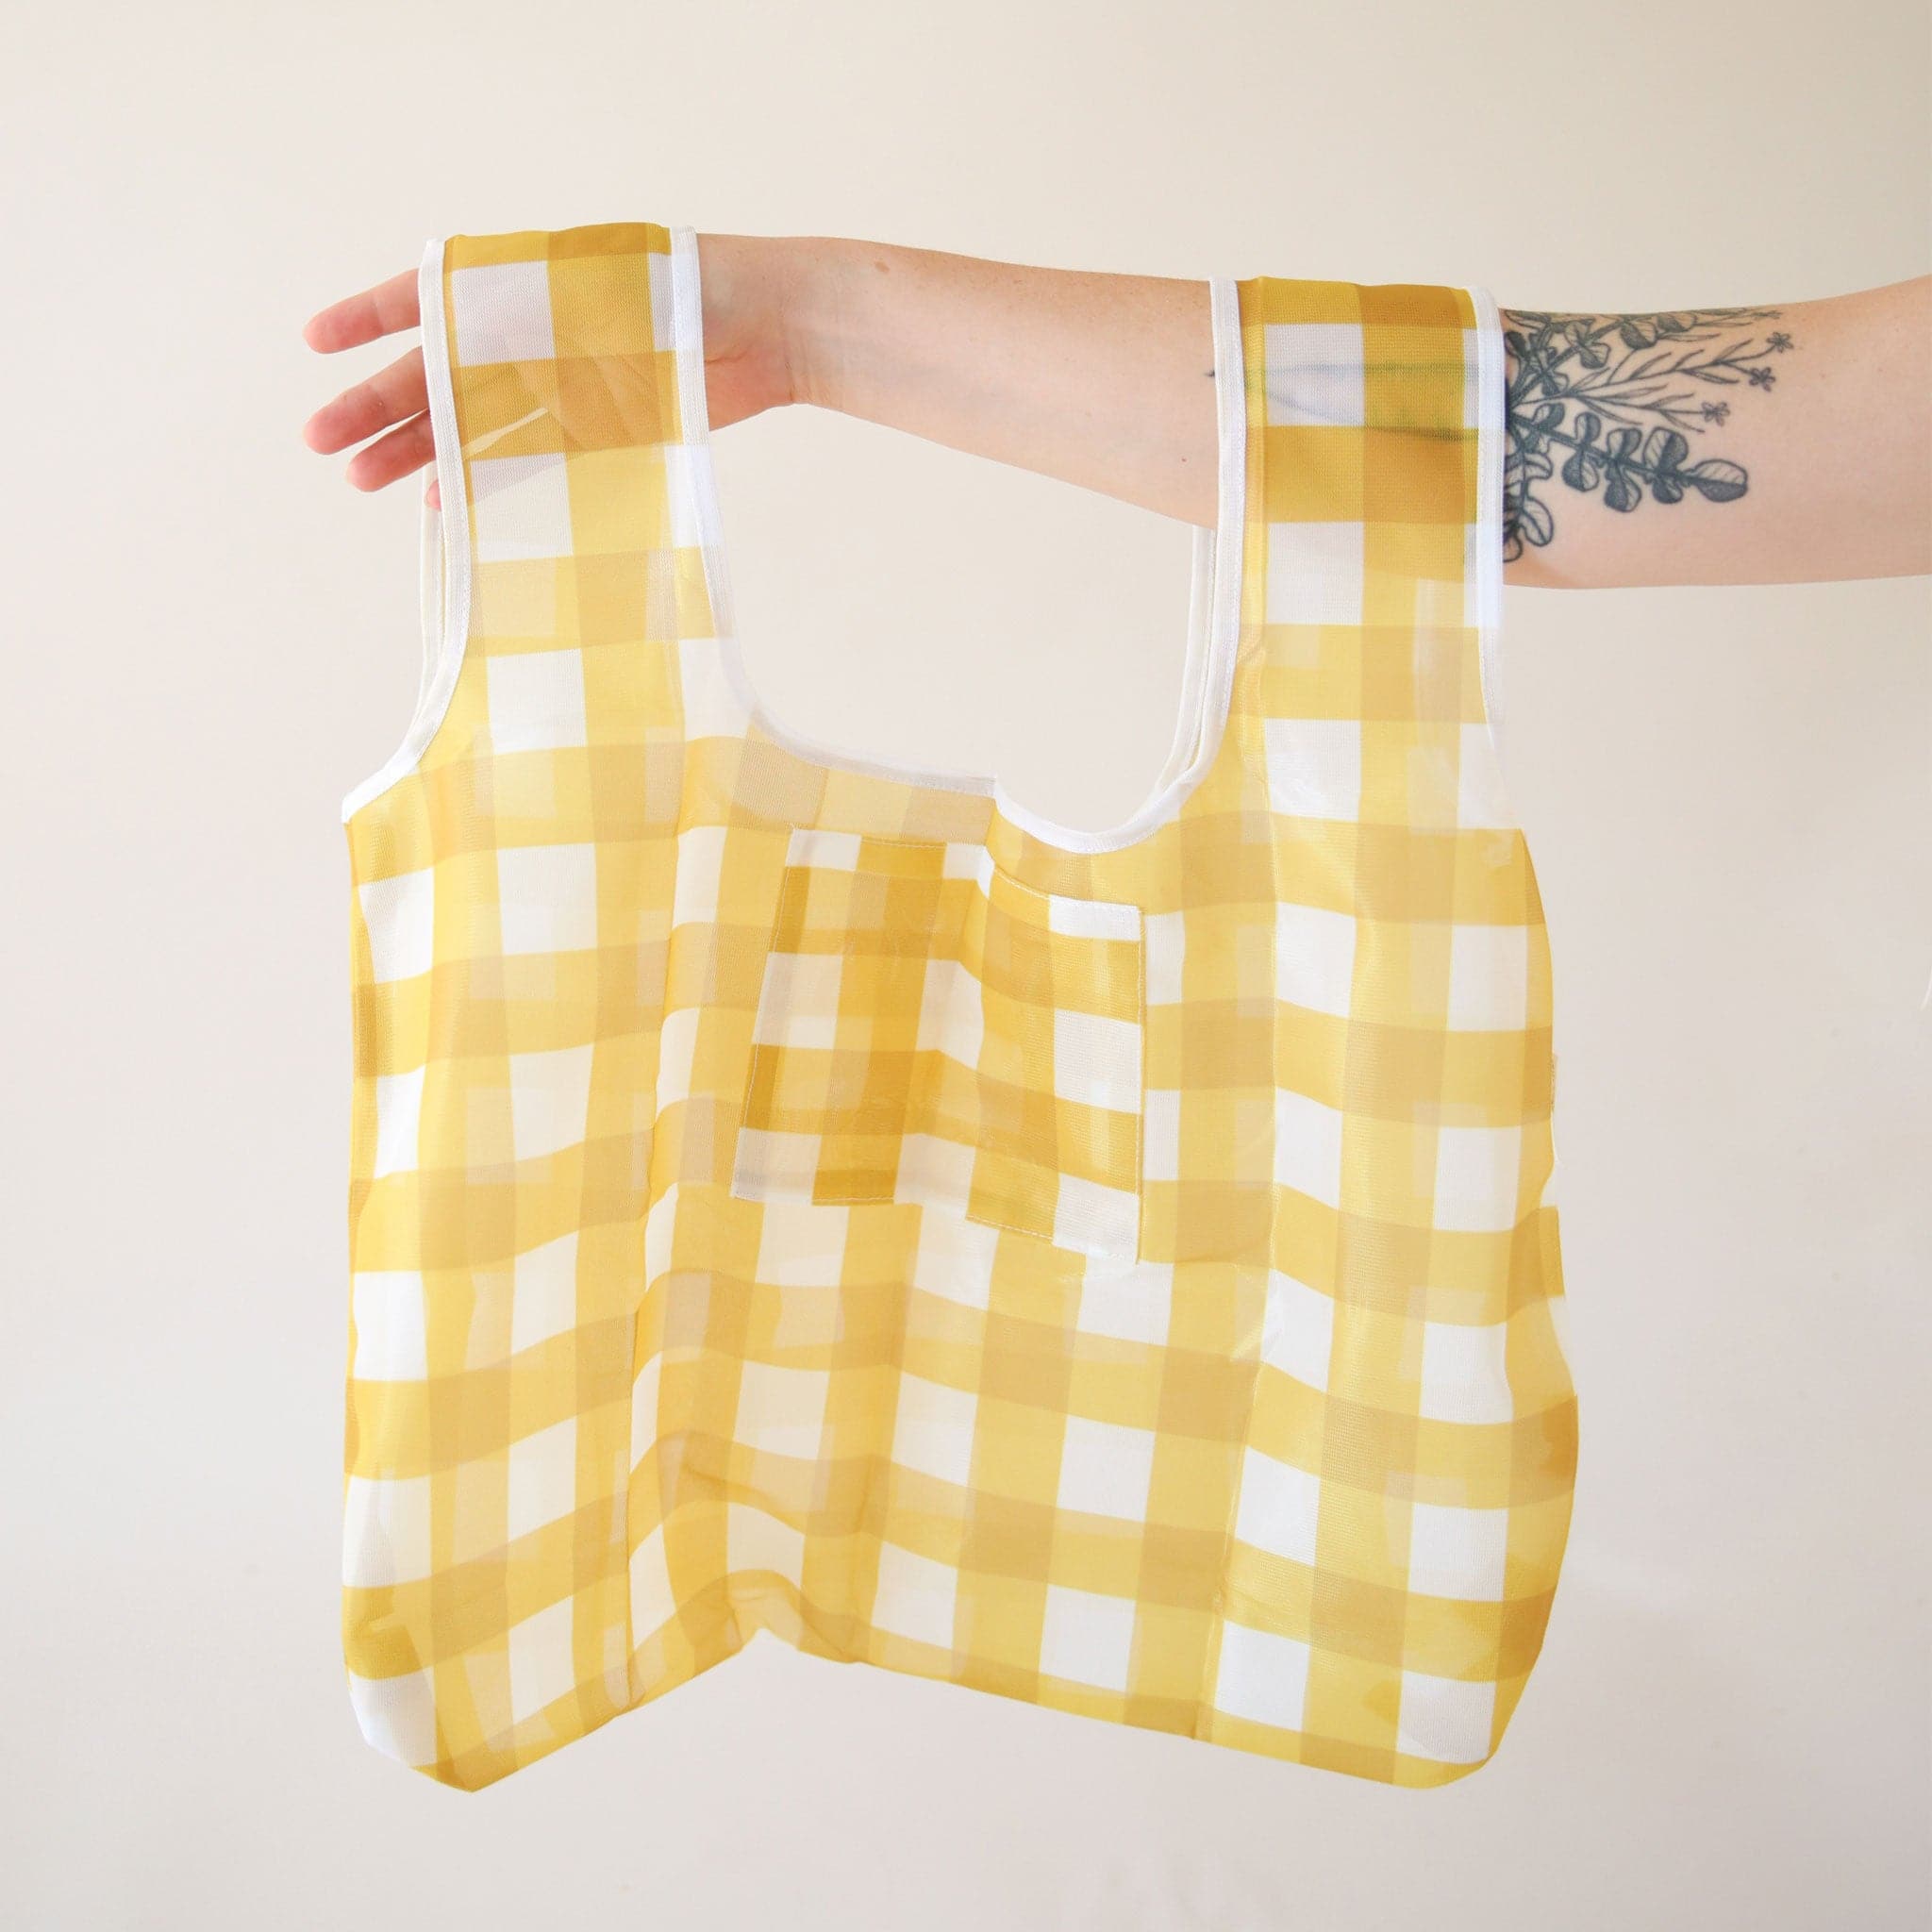 A yellow gingham nylon bag with two straps and a small pocket for keys or easy-to-grab essentials.